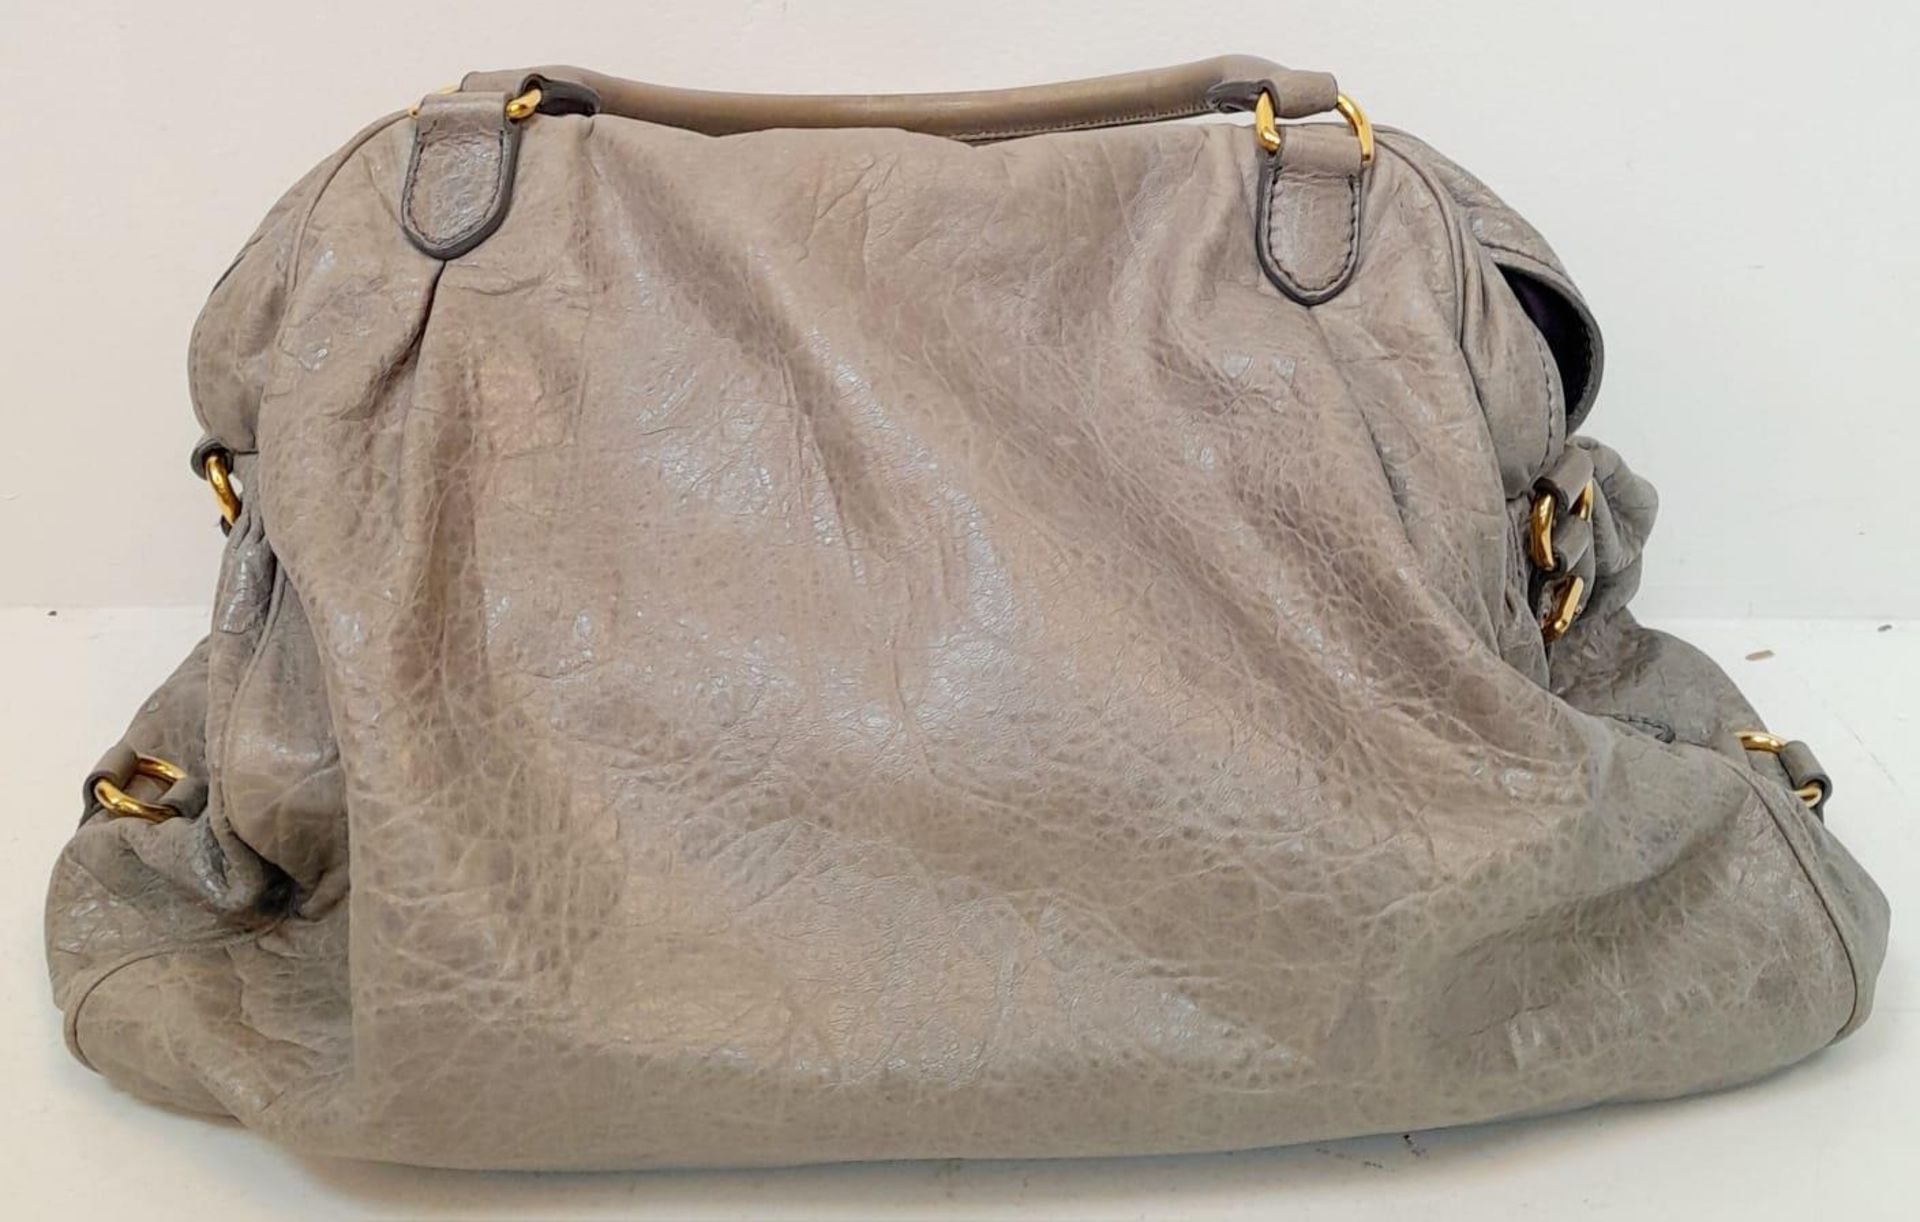 A Miu Miu Vitello Leather Handbag. Textured grey leather exterior with large zipped compartment. - Image 5 of 9